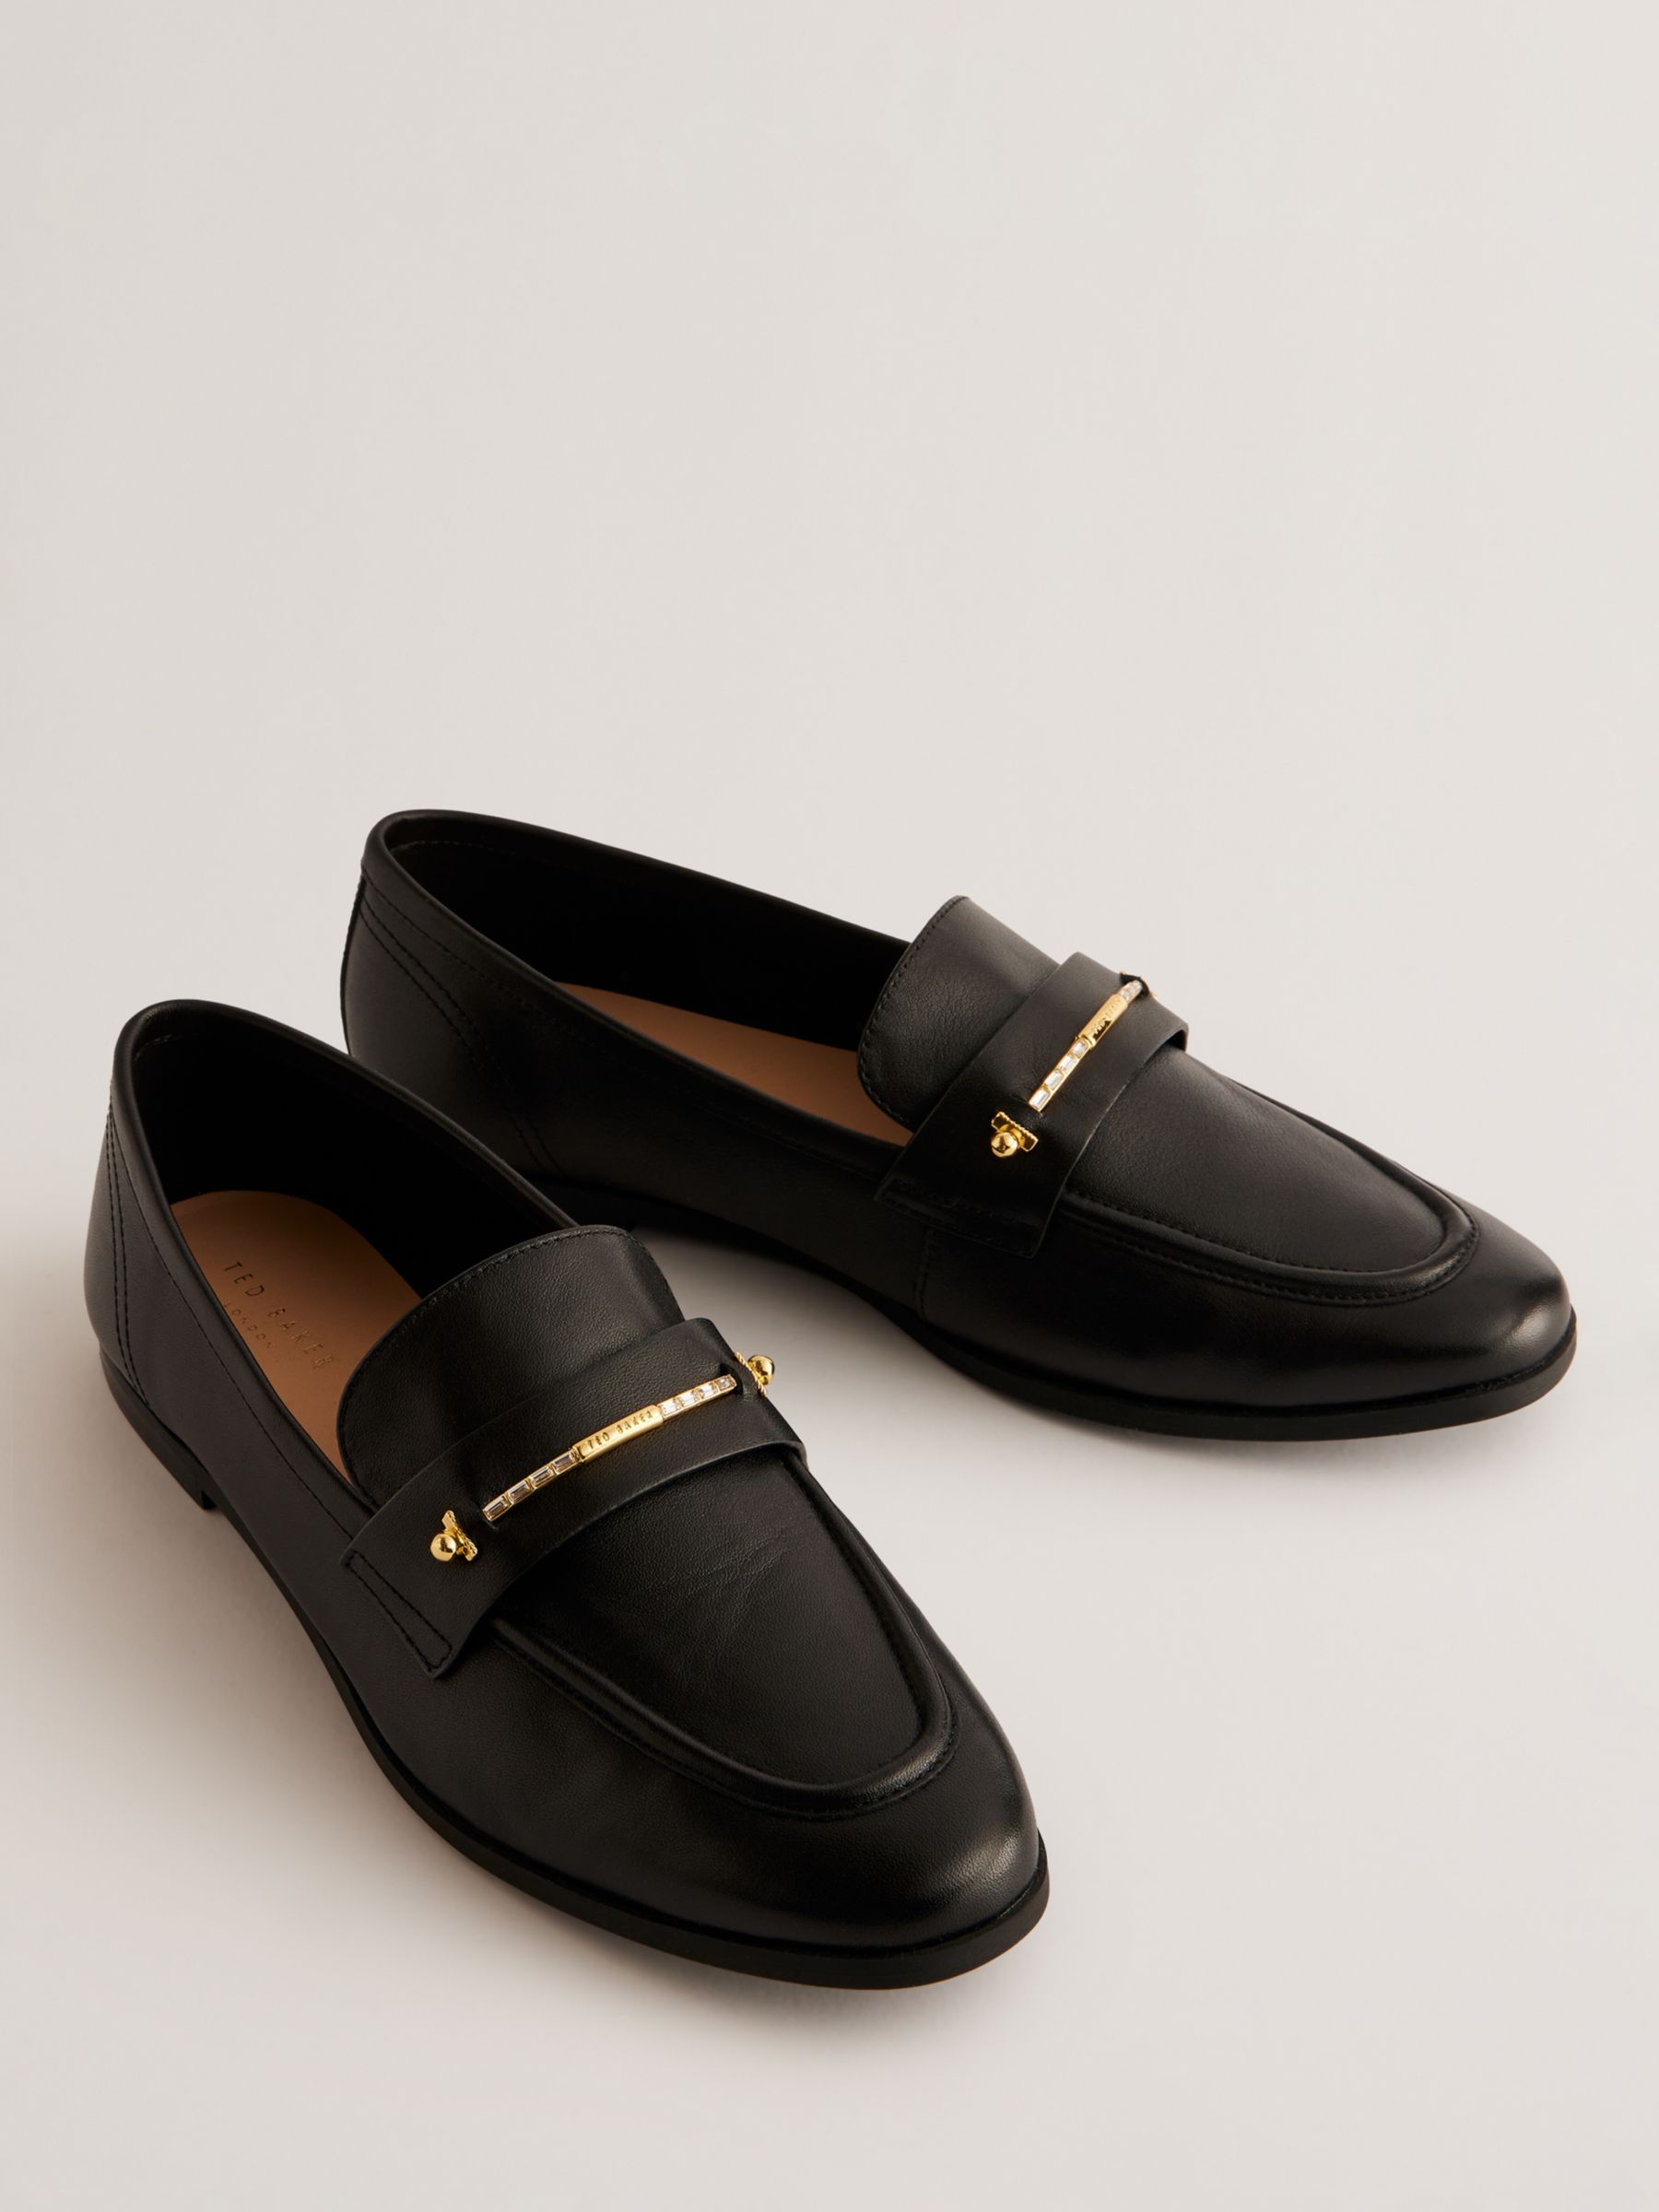 Ted Baker Zzoee Flat Leather Loafers, Black, EU37